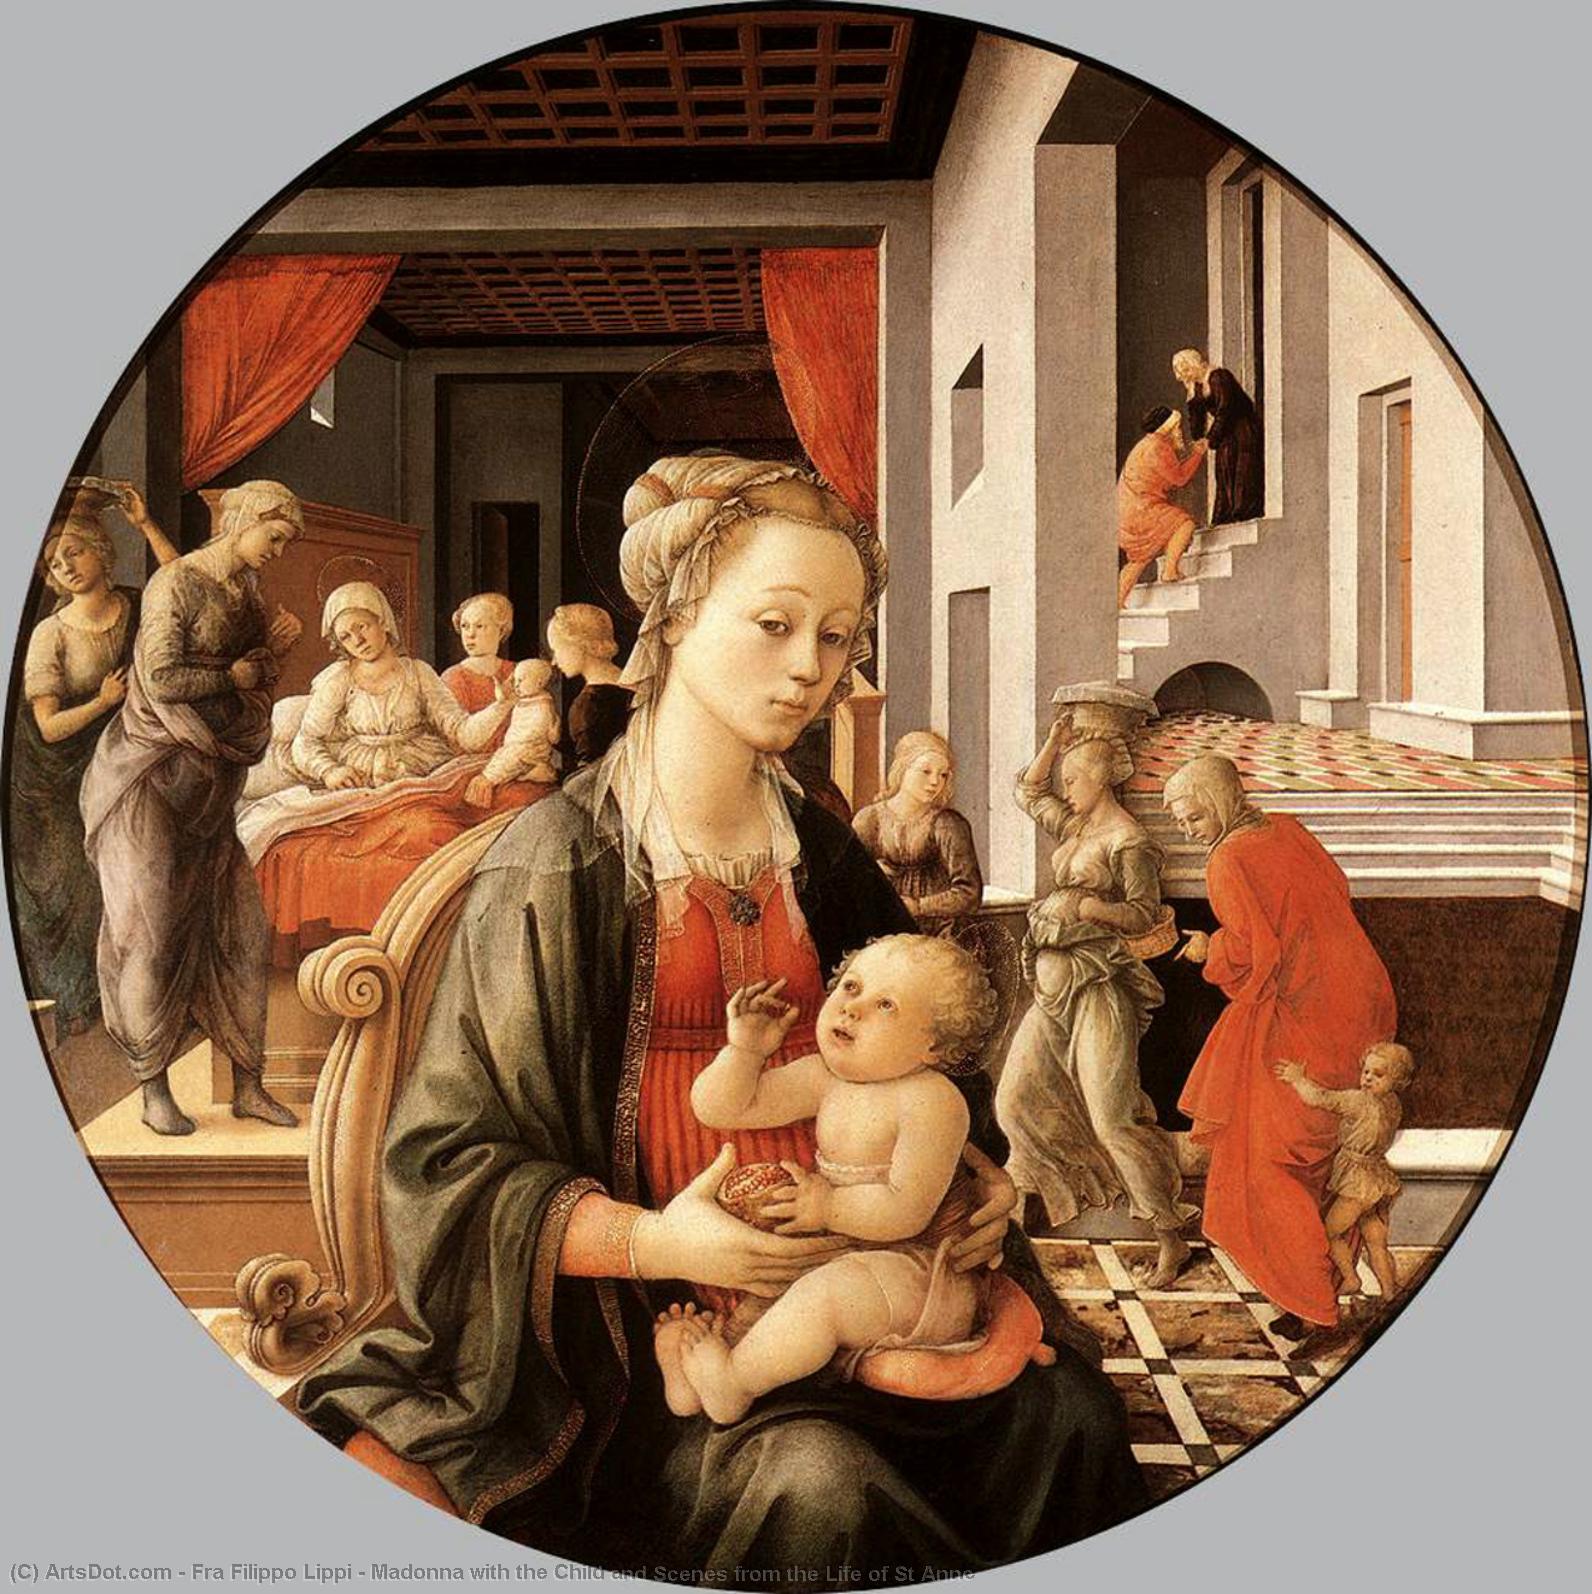 WikiOO.org - Güzel Sanatlar Ansiklopedisi - Resim, Resimler Fra Filippo Lippi - Madonna with the Child and Scenes from the Life of St Anne